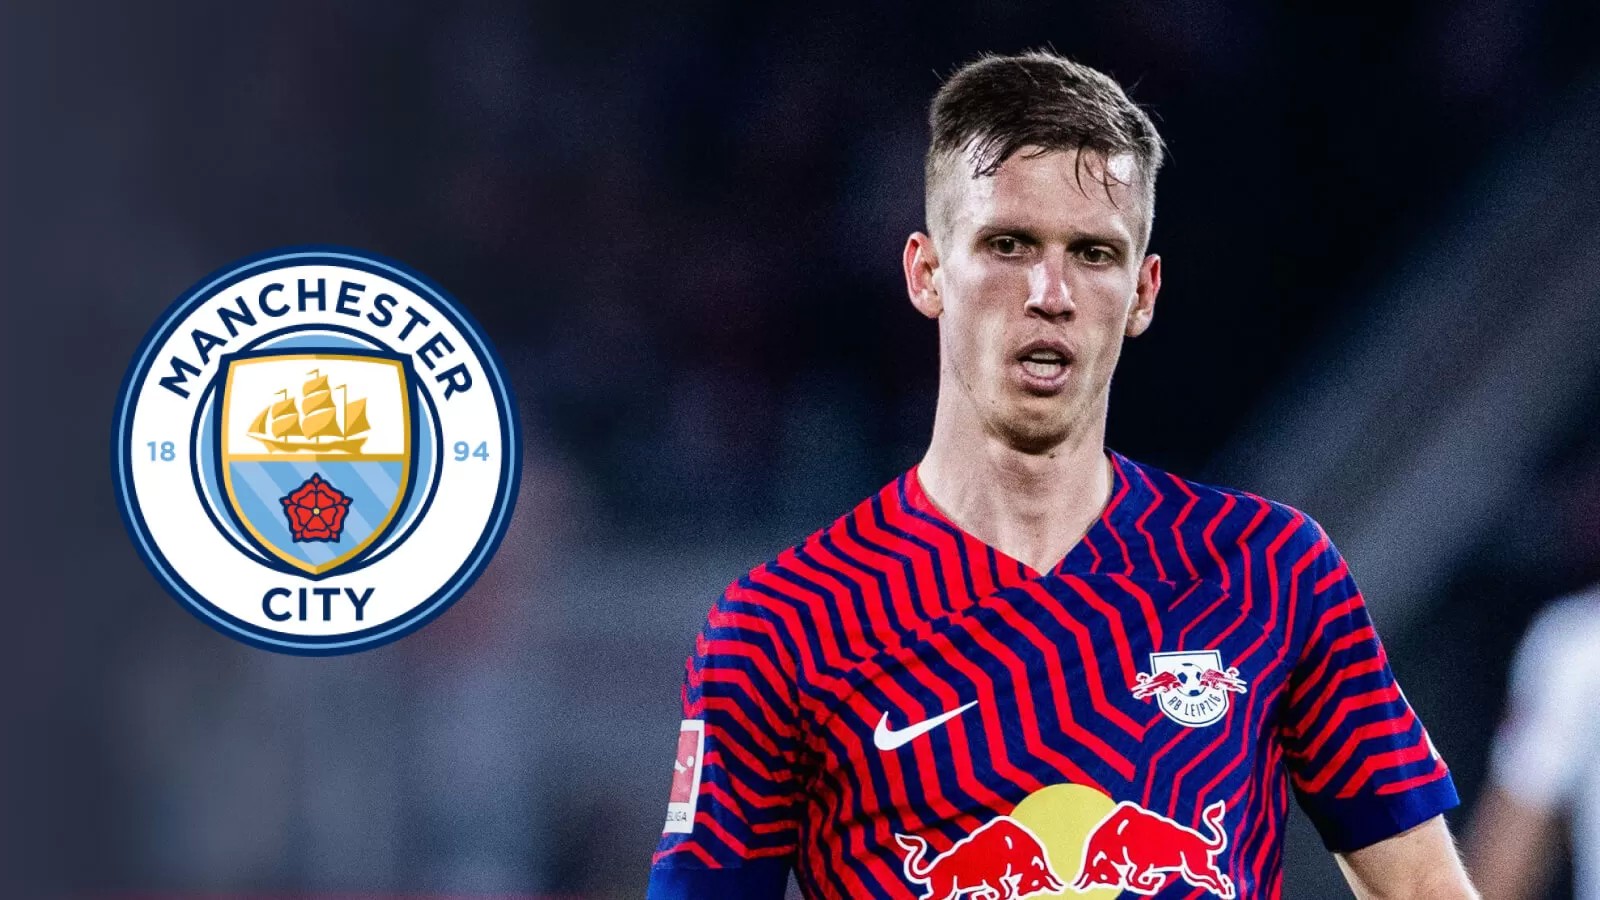 Man City ‘steals’ Â£51m signing which will ‘hurt’ two other clubs after Guardiola request